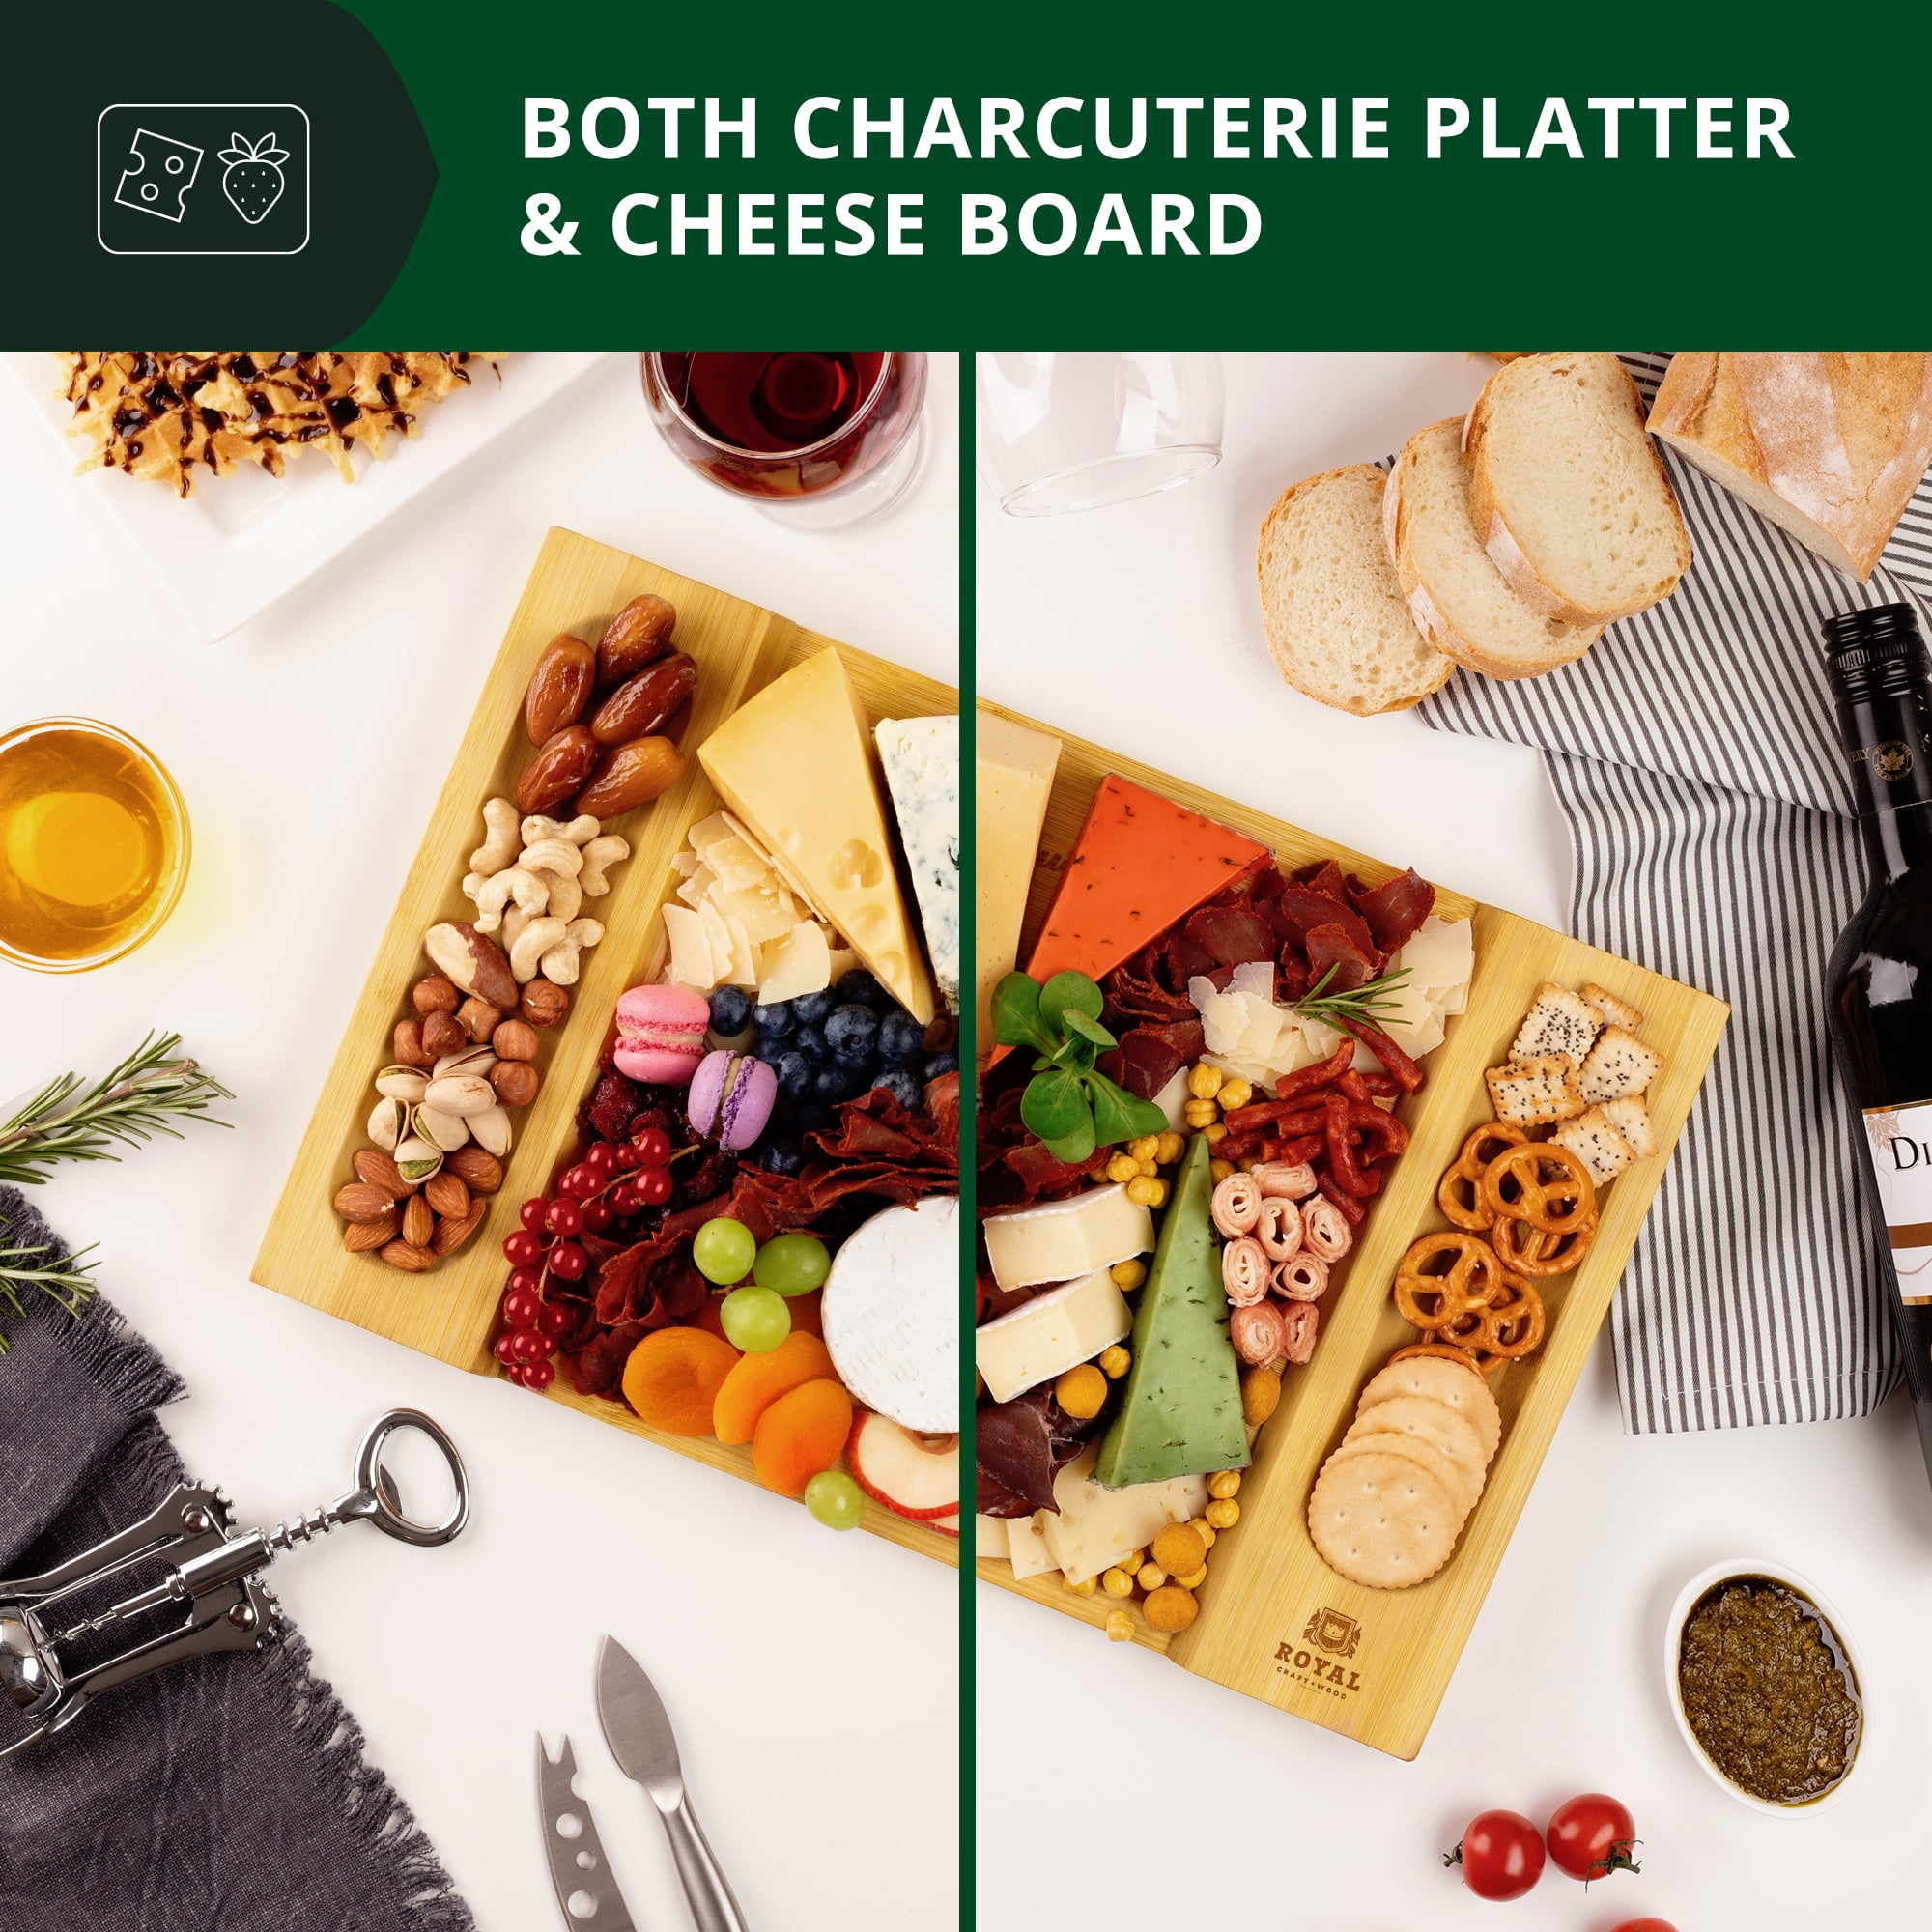  ROYAL CRAFT WOOD Charcuterie and Cheese Boards Set